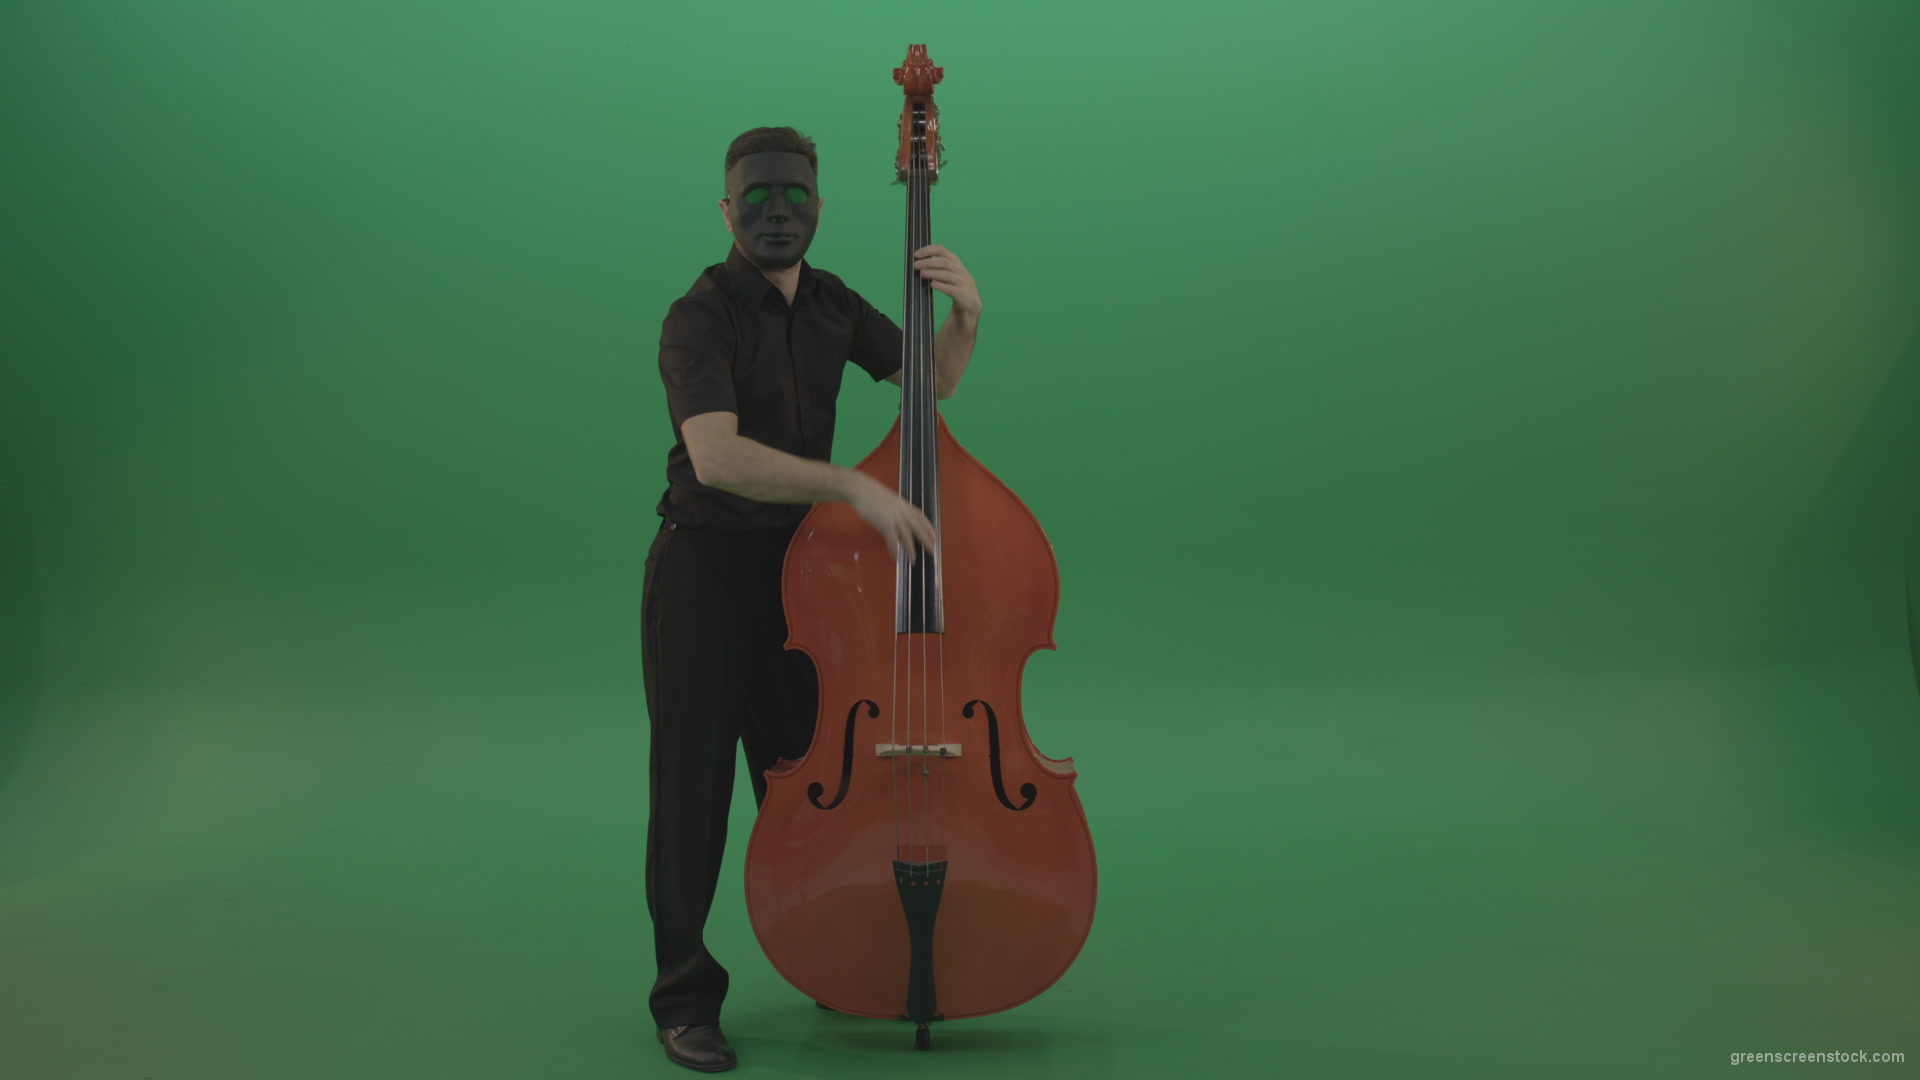 Full-size-man-in-black-gead-mask-with-chromakey-eyes-play-jazz-on-double-bass-String-music-instrument-isolated-on-green-screen_005 Green Screen Stock